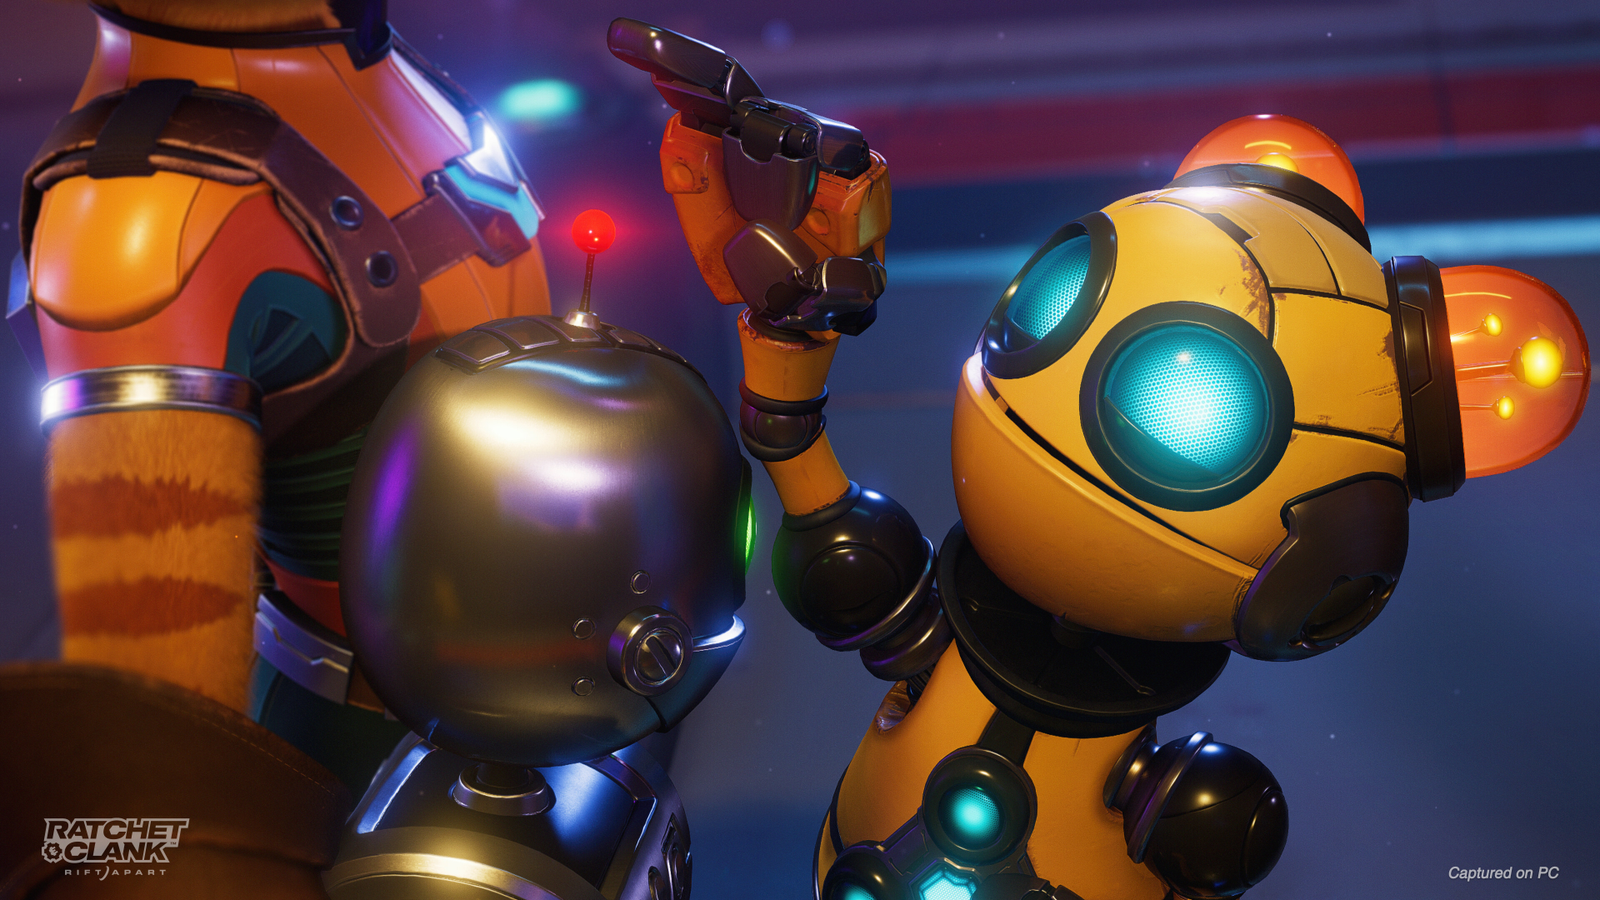 Ratchet & Clank: Rift Apart coming to PC in July | Rock Paper Shotgun